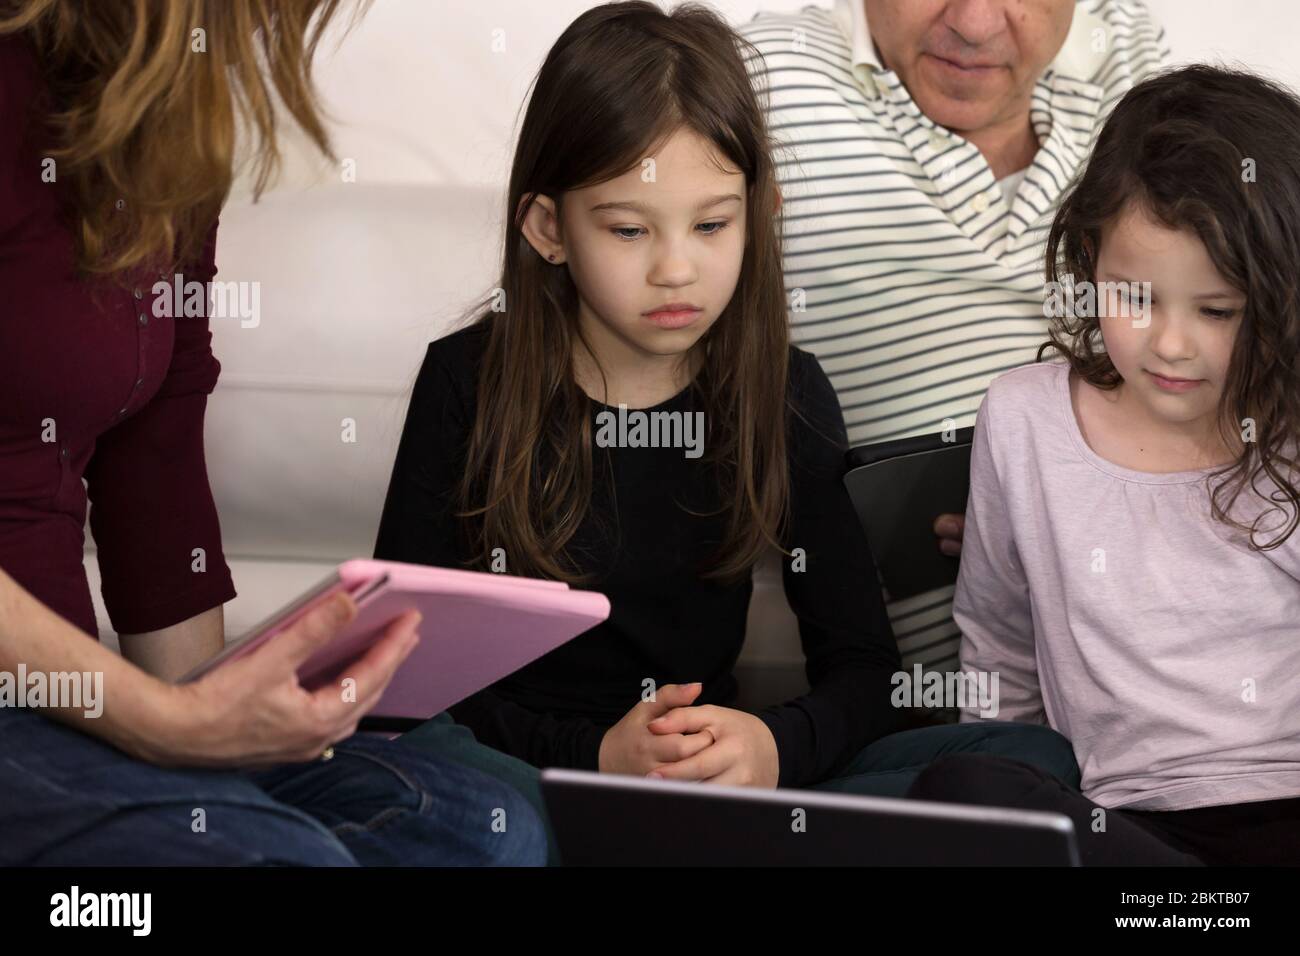 Family teaching children at home on Electronic Devices Stock Photo